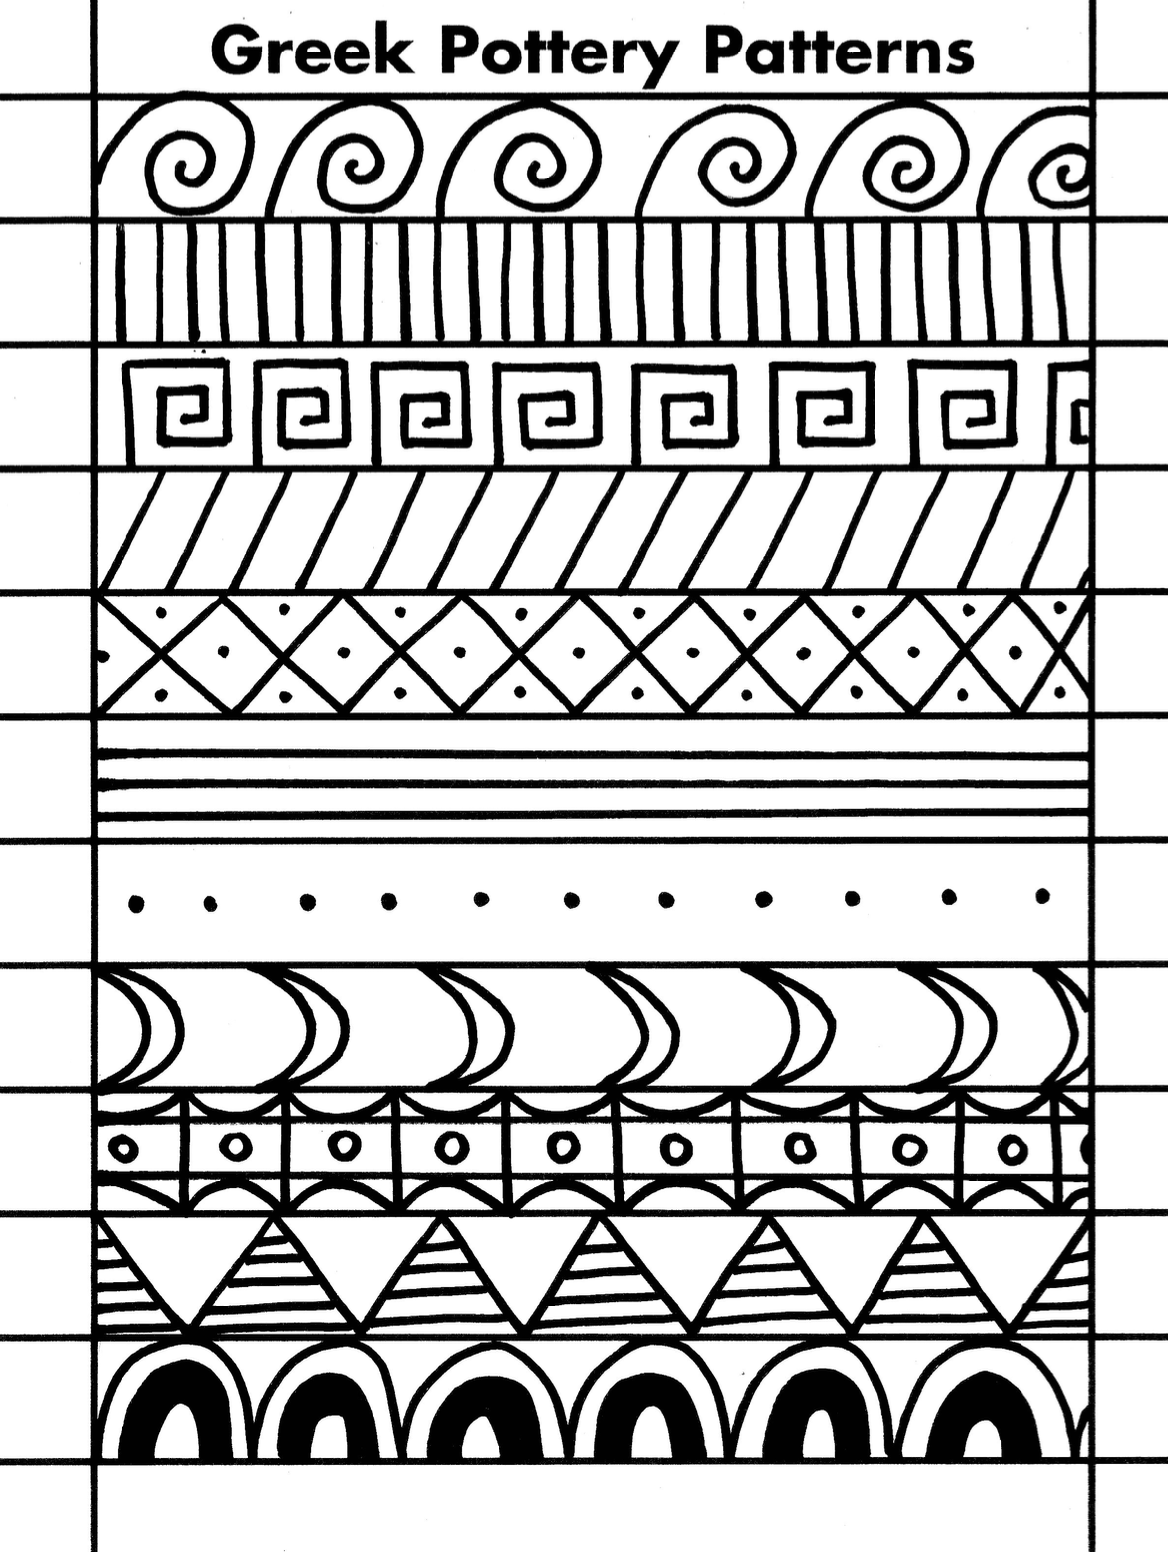 Simple Greek Pottery Patterns.png